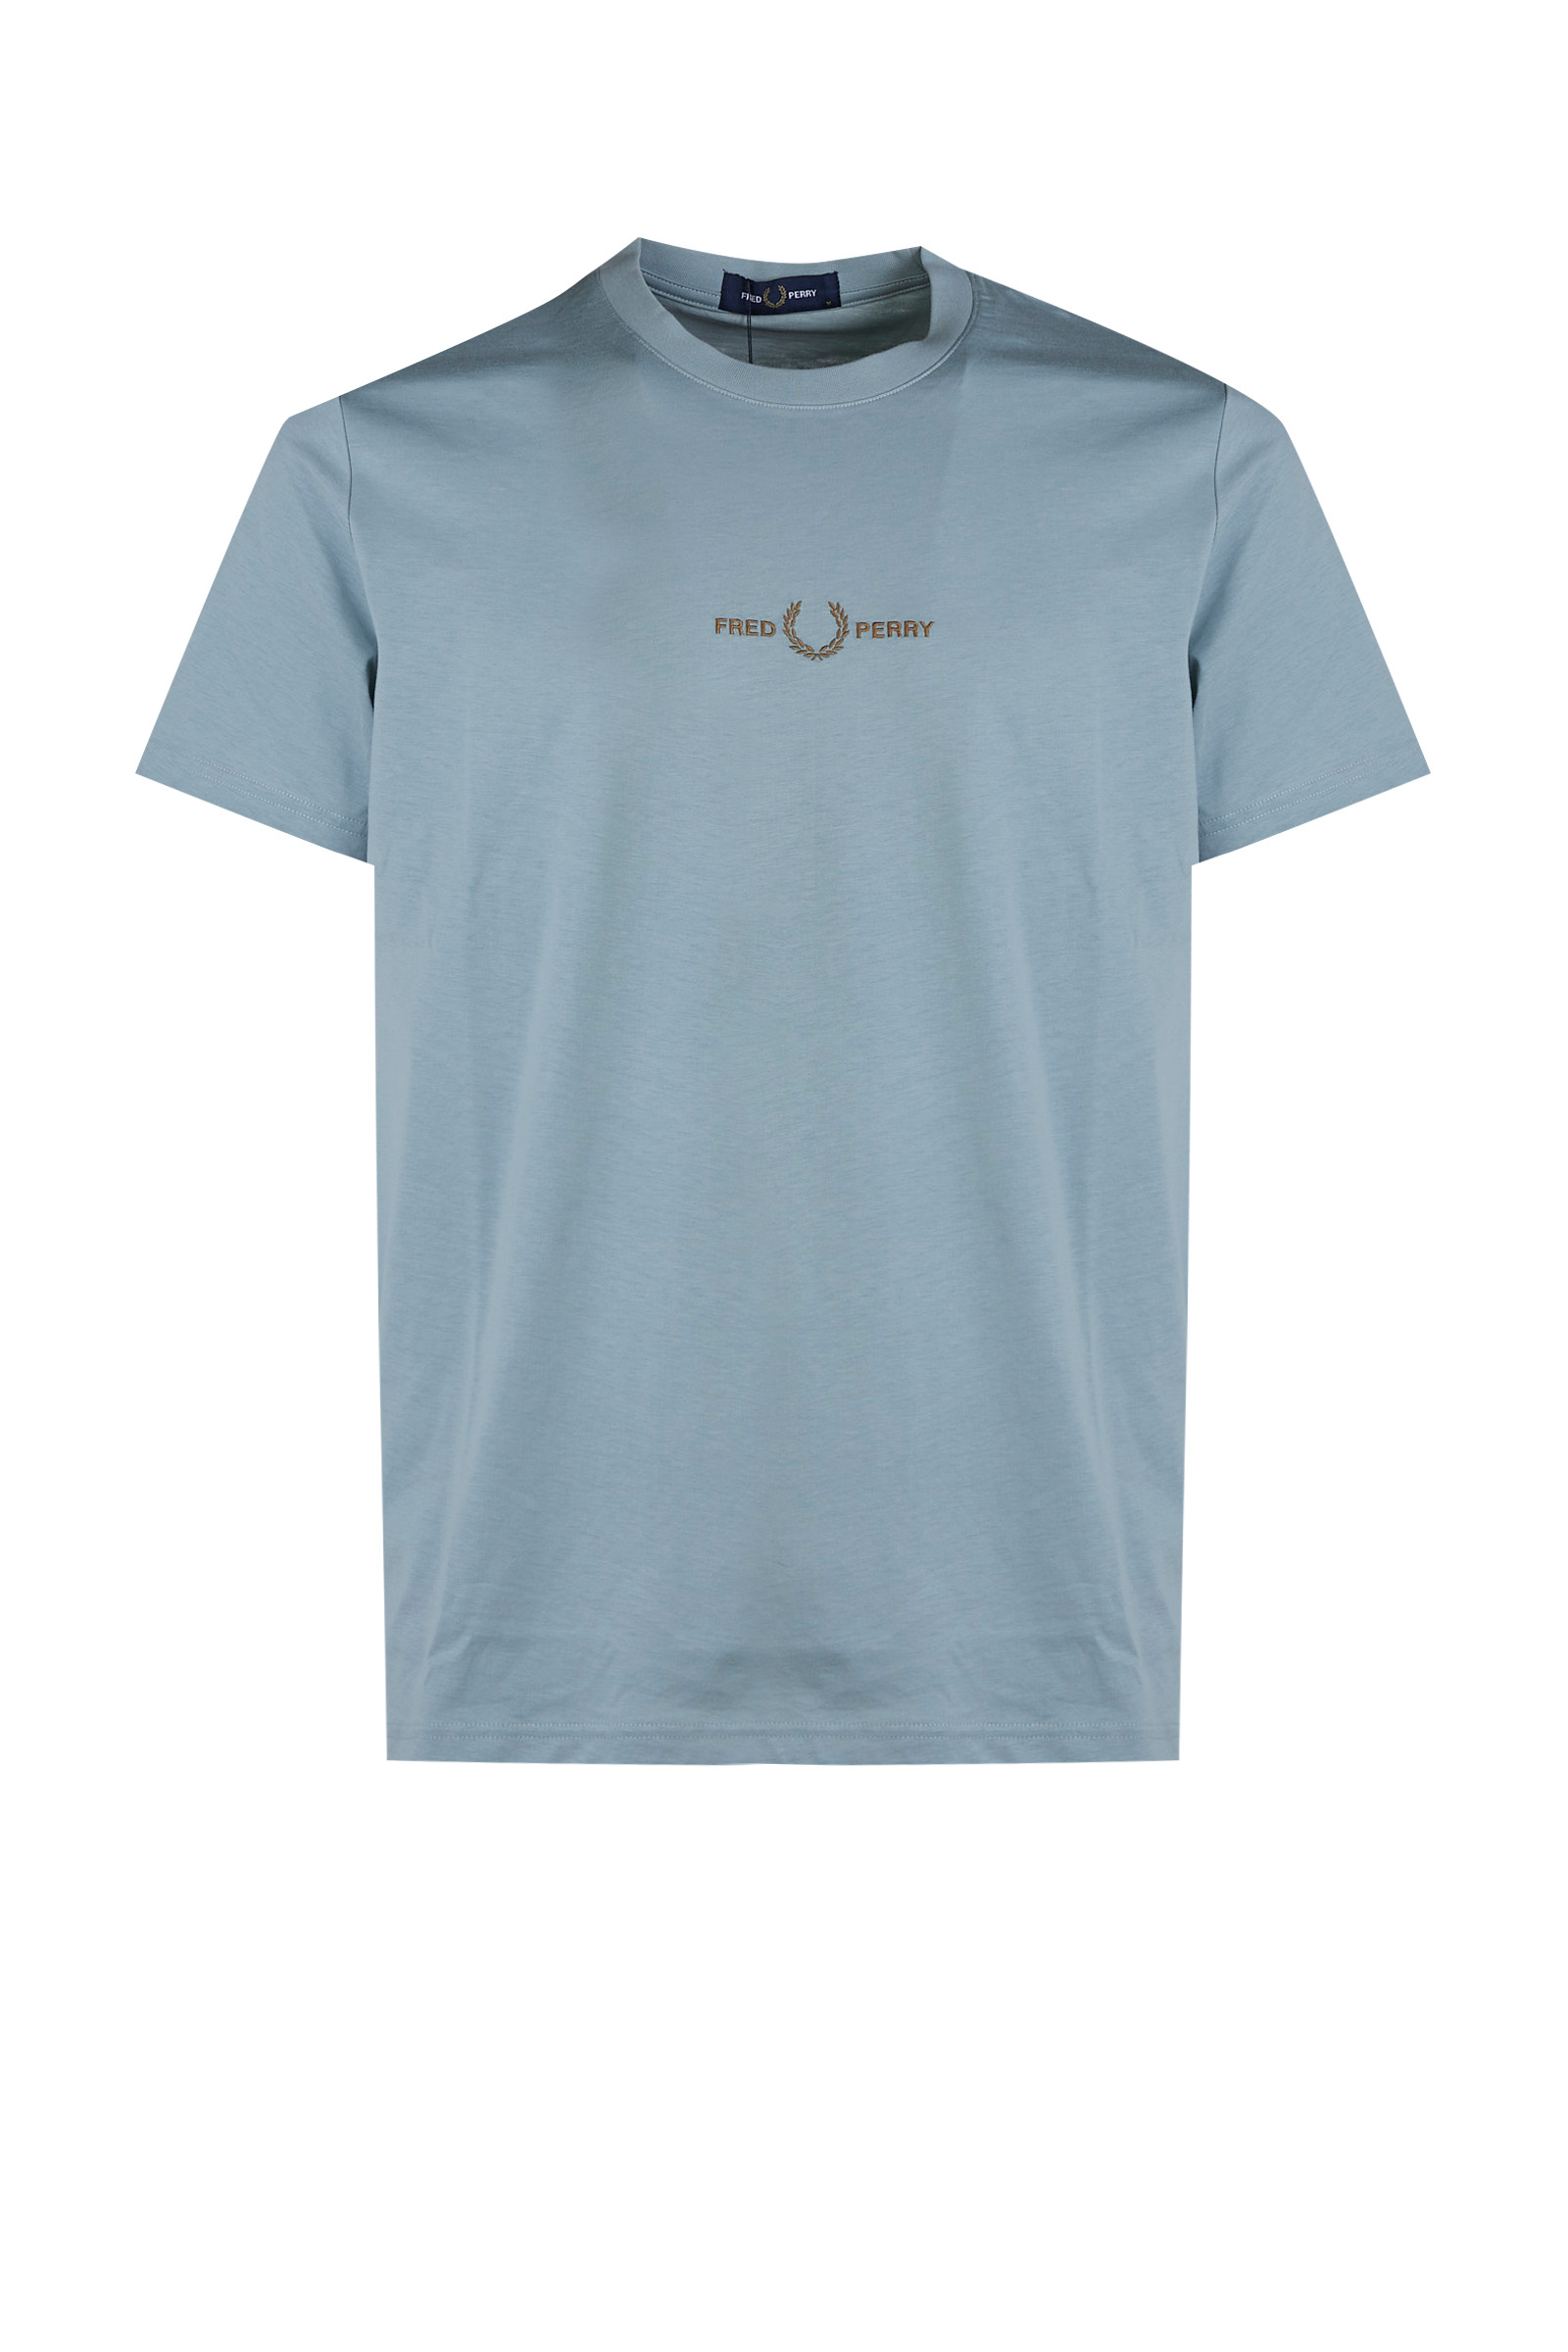 FRED PERRY T-SHIRT T-EMBROIDERED M4580 959 SALVIA UOMO